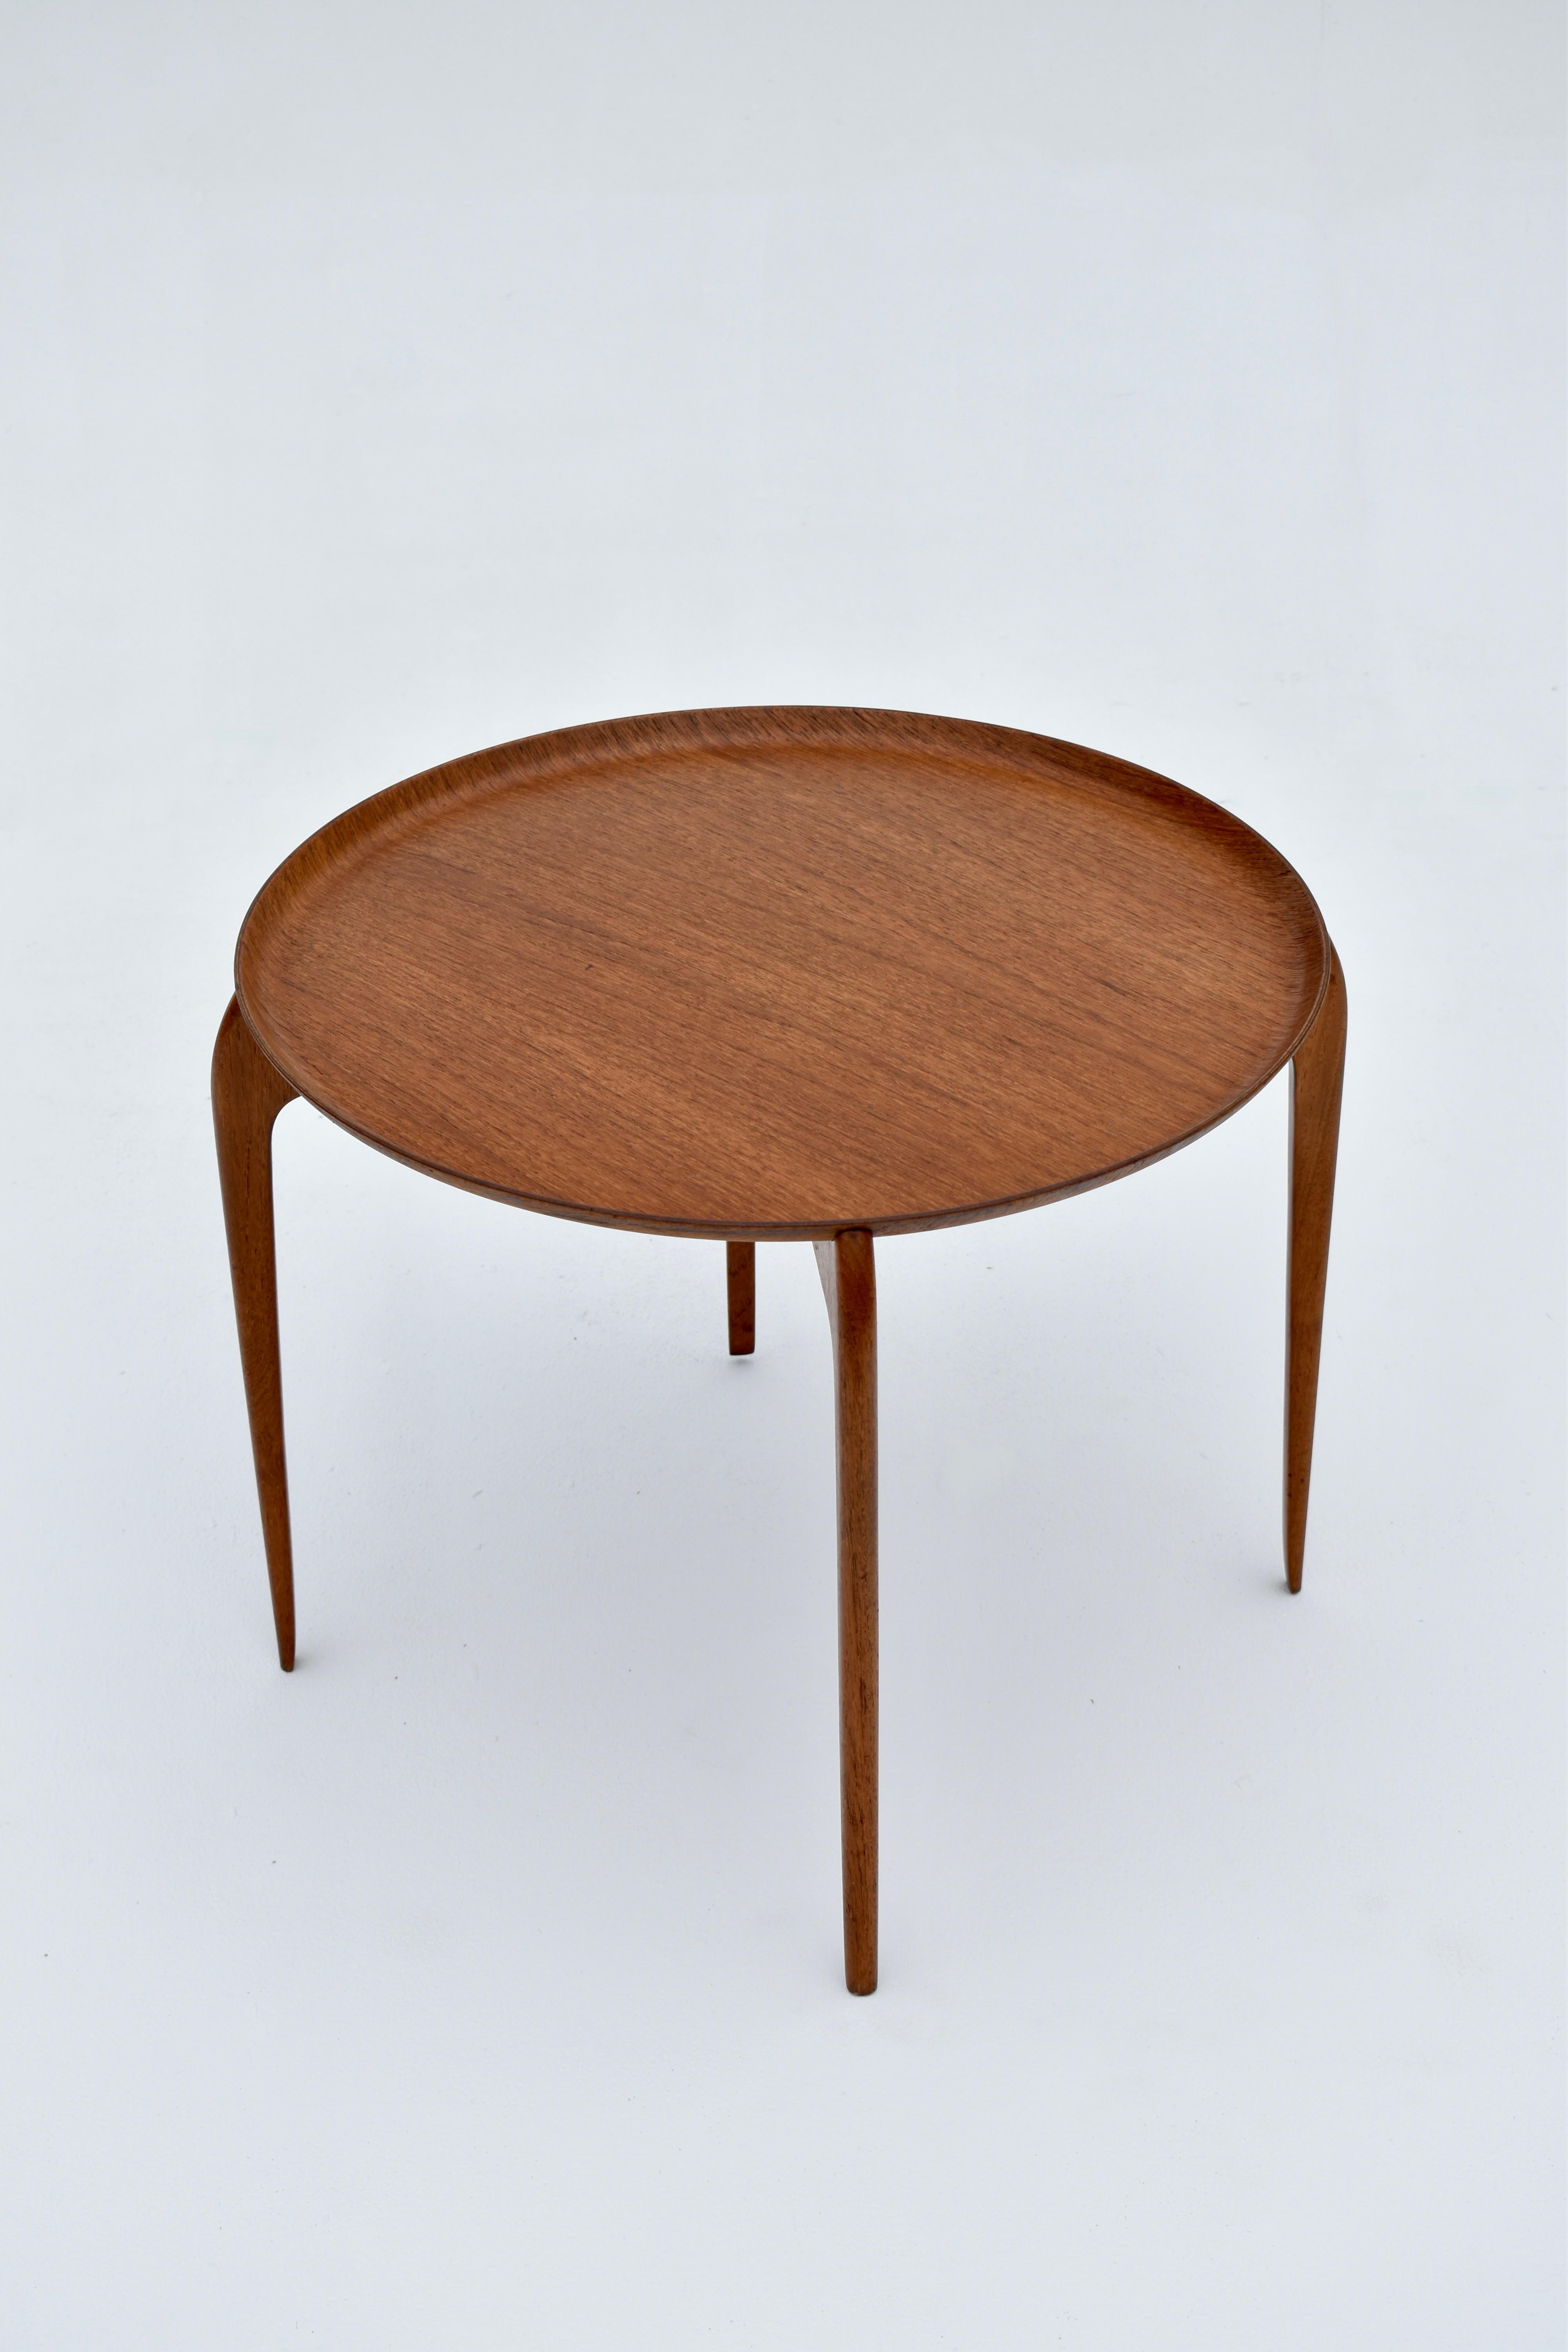 Early production side table with removable tray top designed by Svend Willumsen & H Engholm for Fritz Hansen.

You will not find a prettier or more elegant side table, we love these things. The perfect table to situate next to your favourite